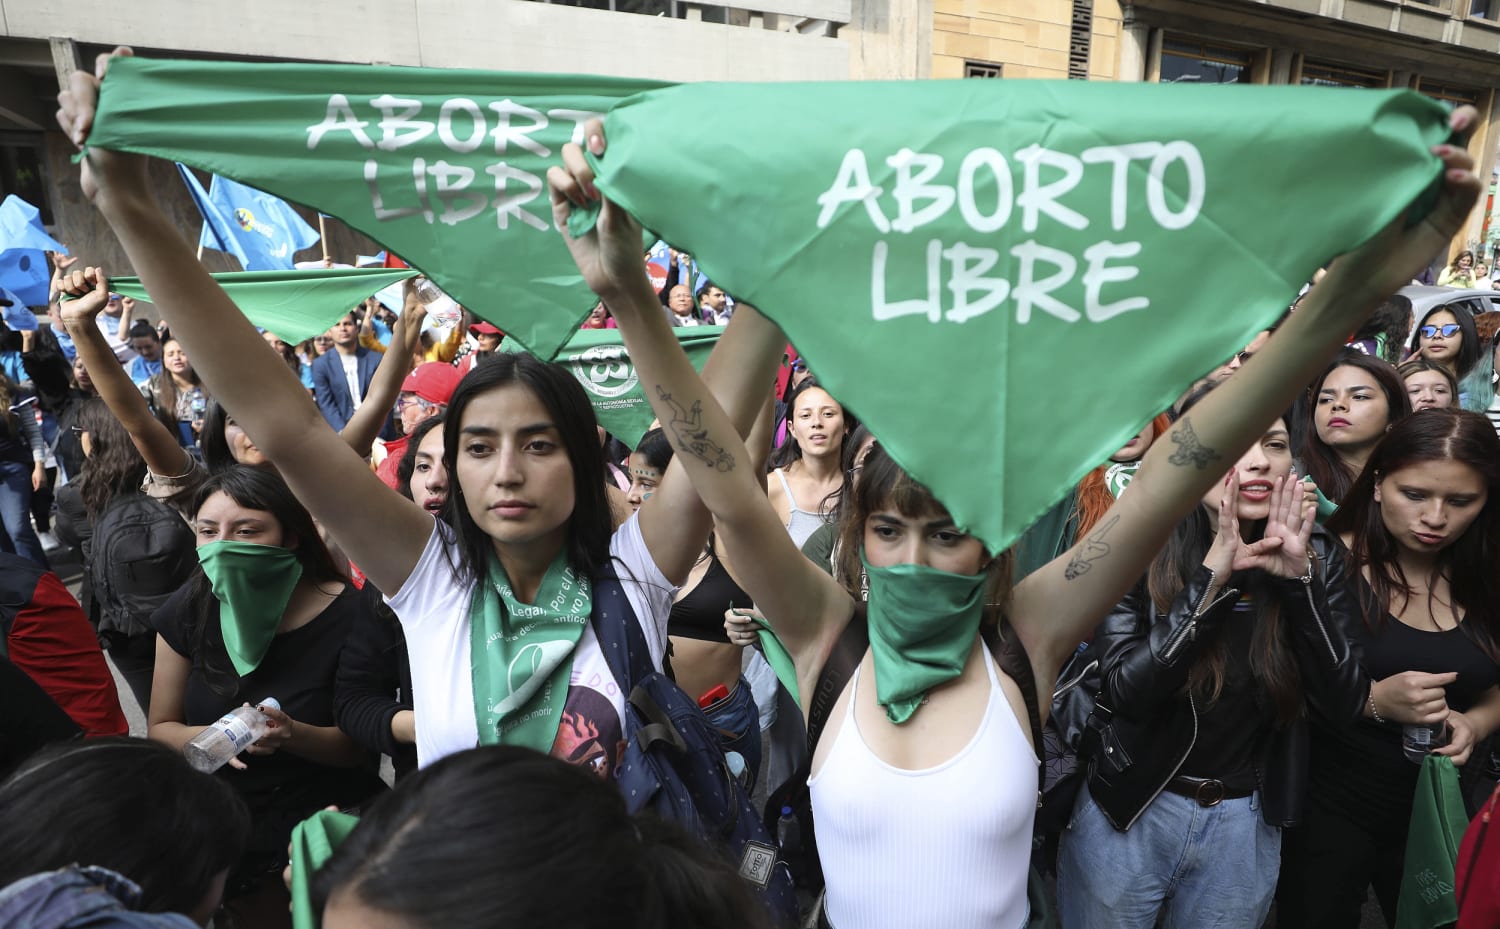 ‘The court owes it to women’: Groups decry Colombia’s abortion ruling delay